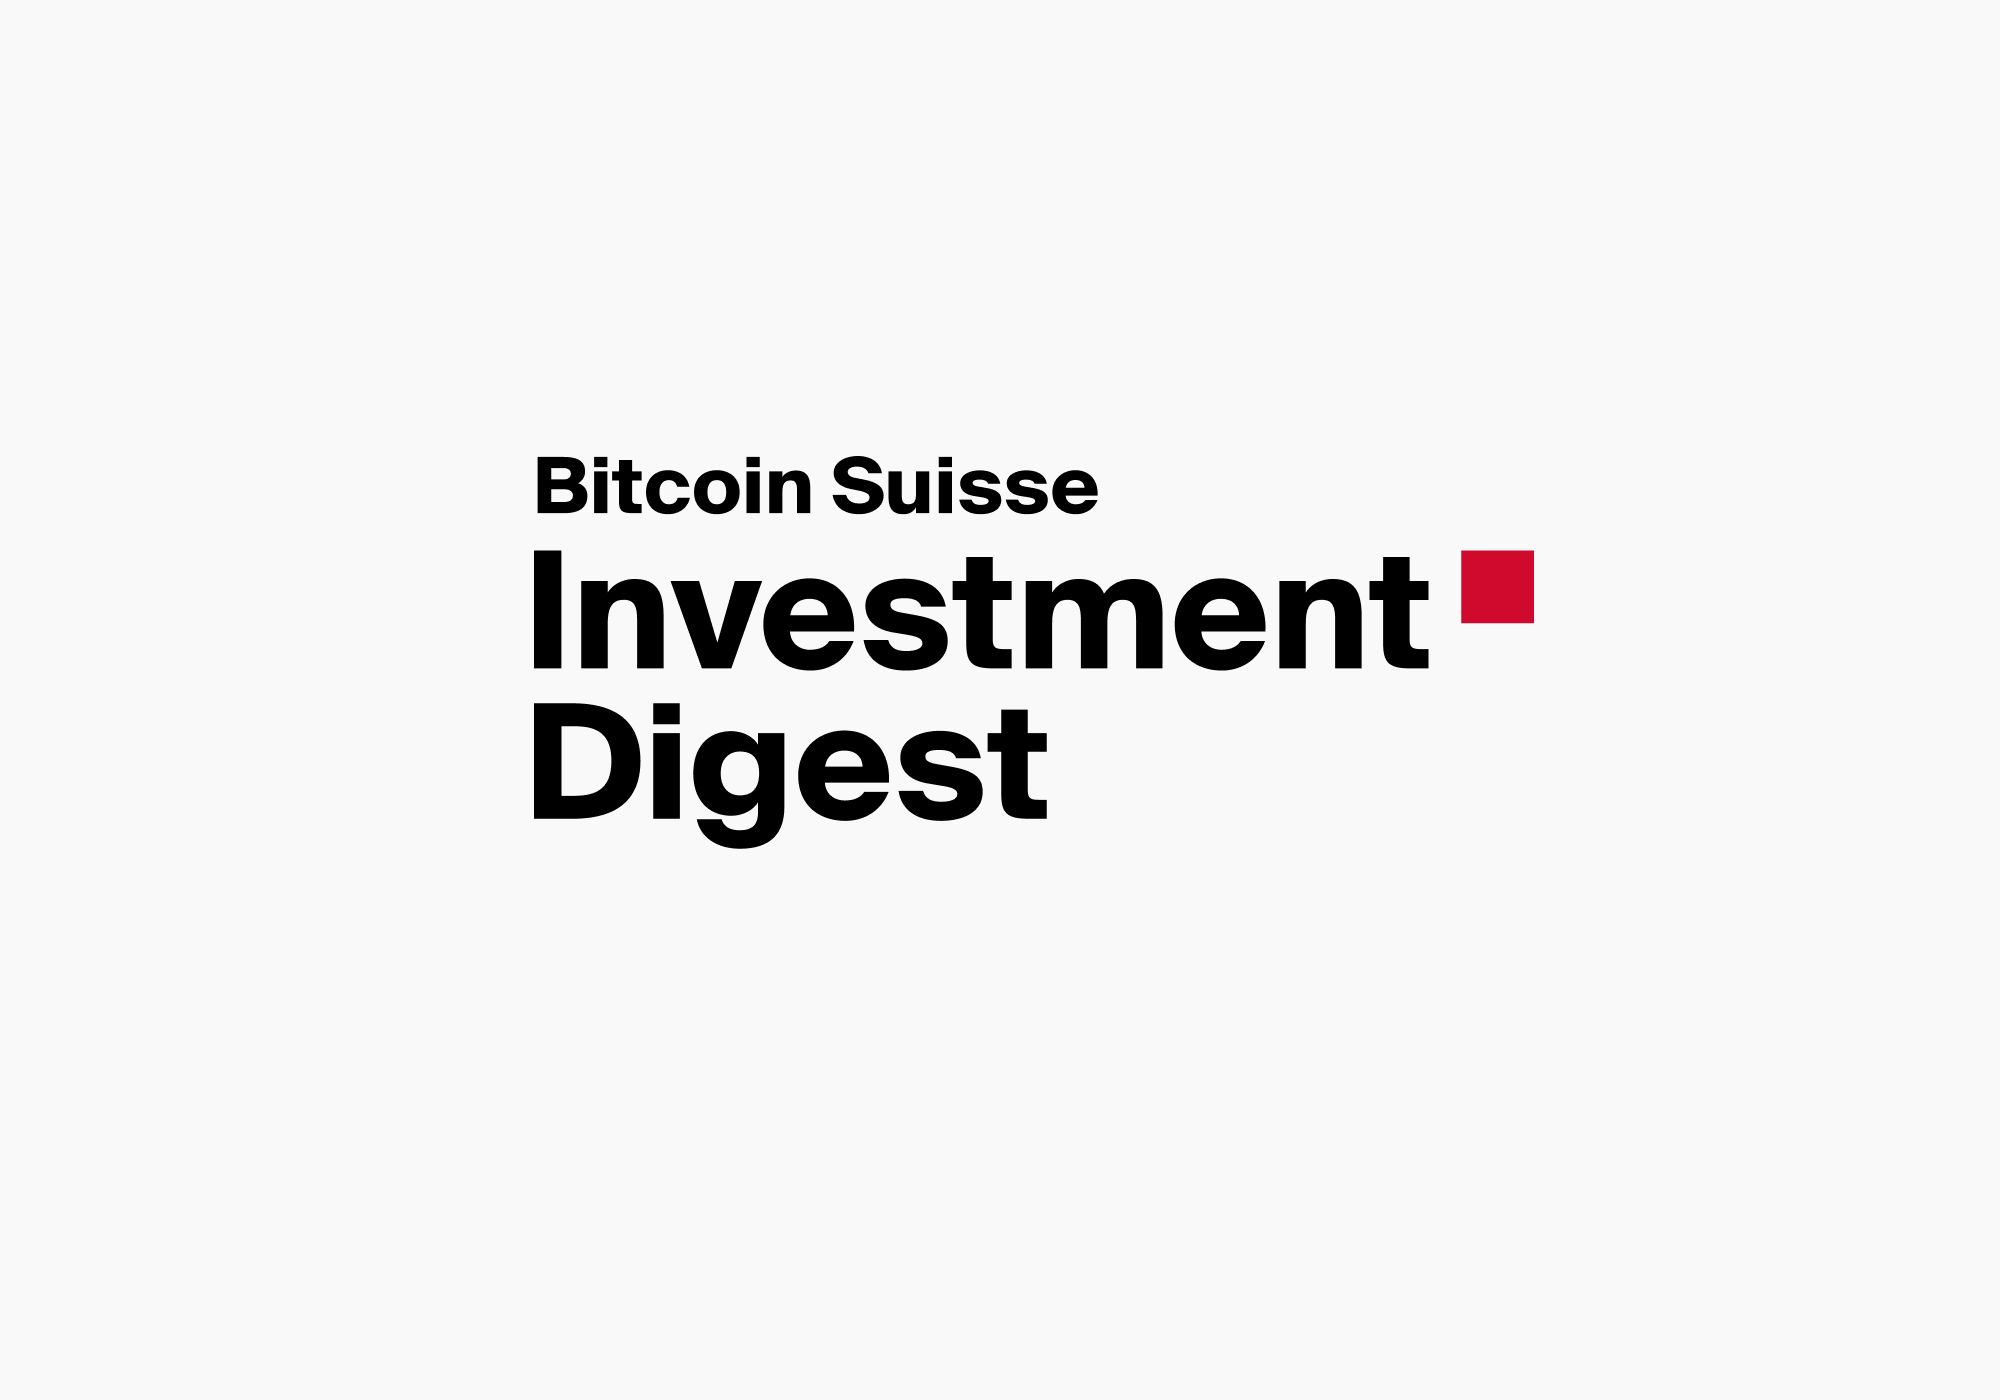 Investment Digest Launch News Graphic.jpg